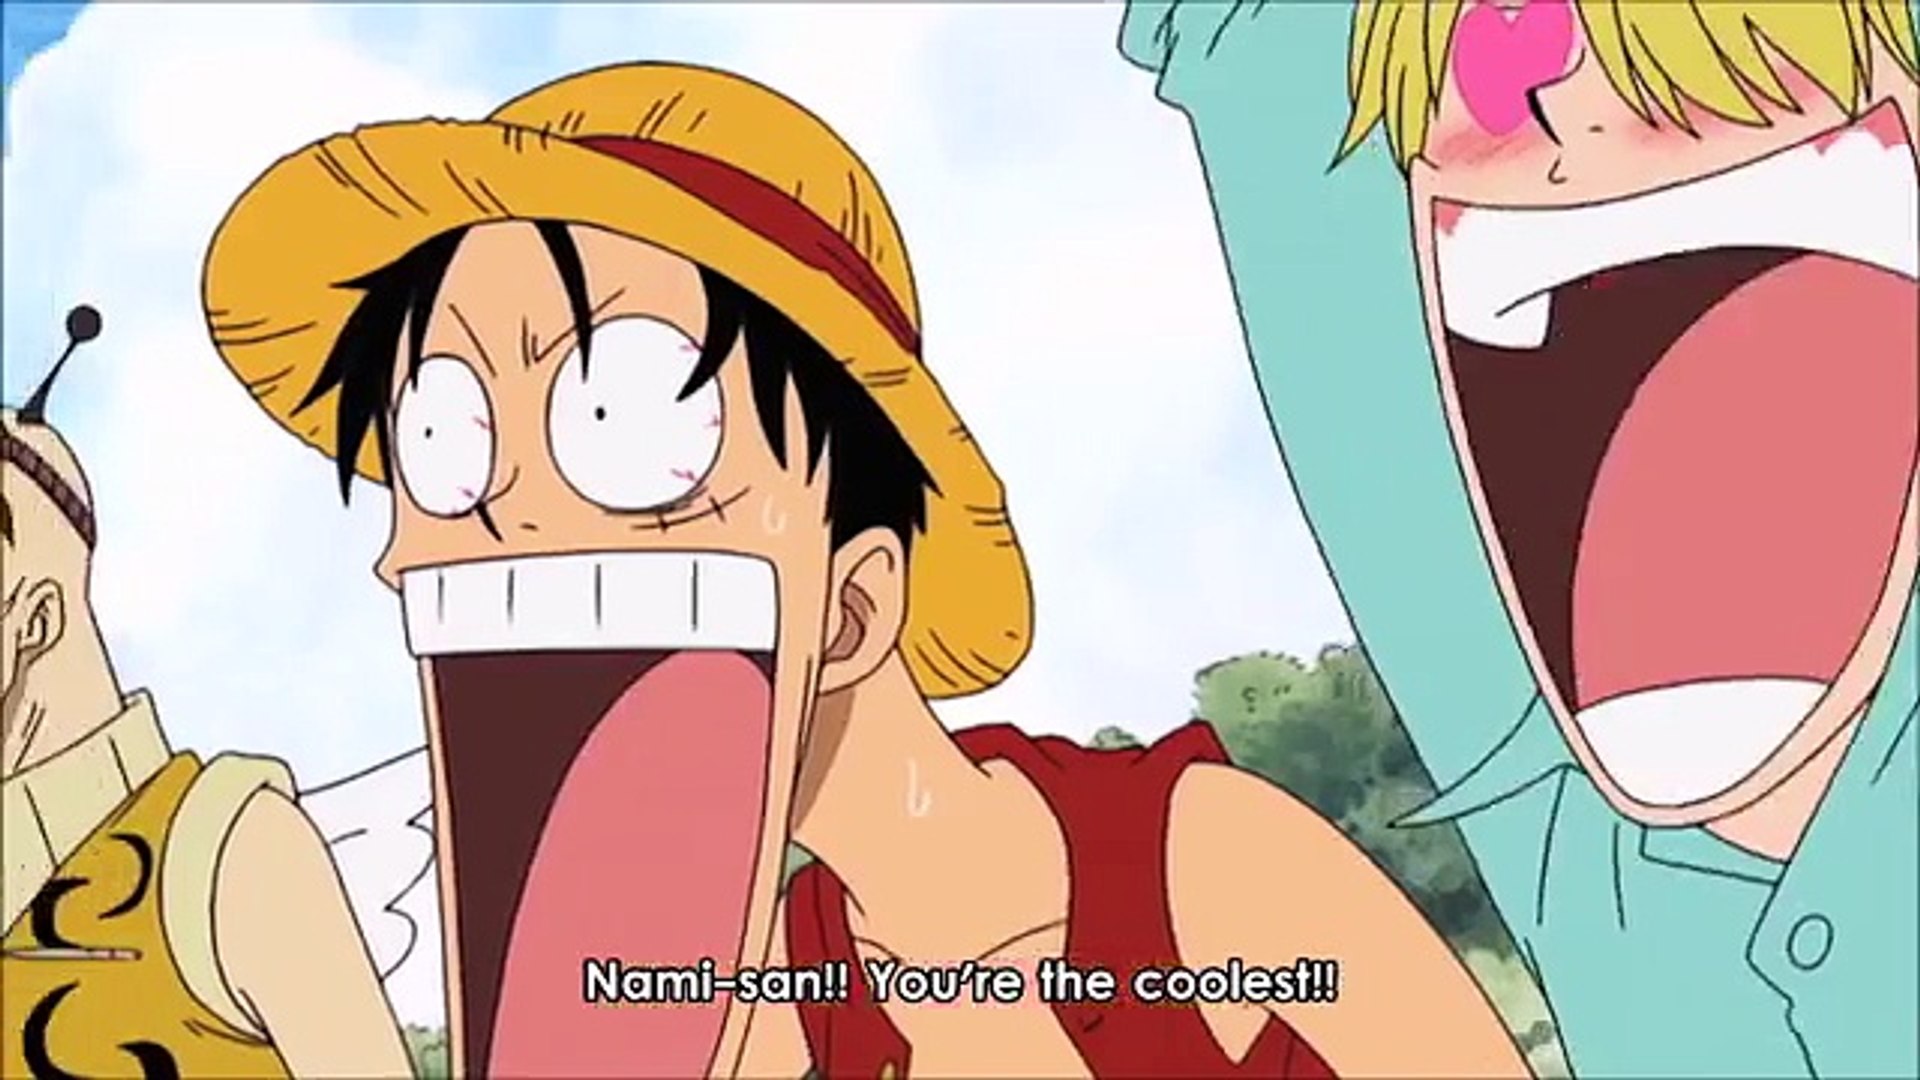 Nami's Too Loyal to Lie About Luffy In This 'One Piece' Anime Clip